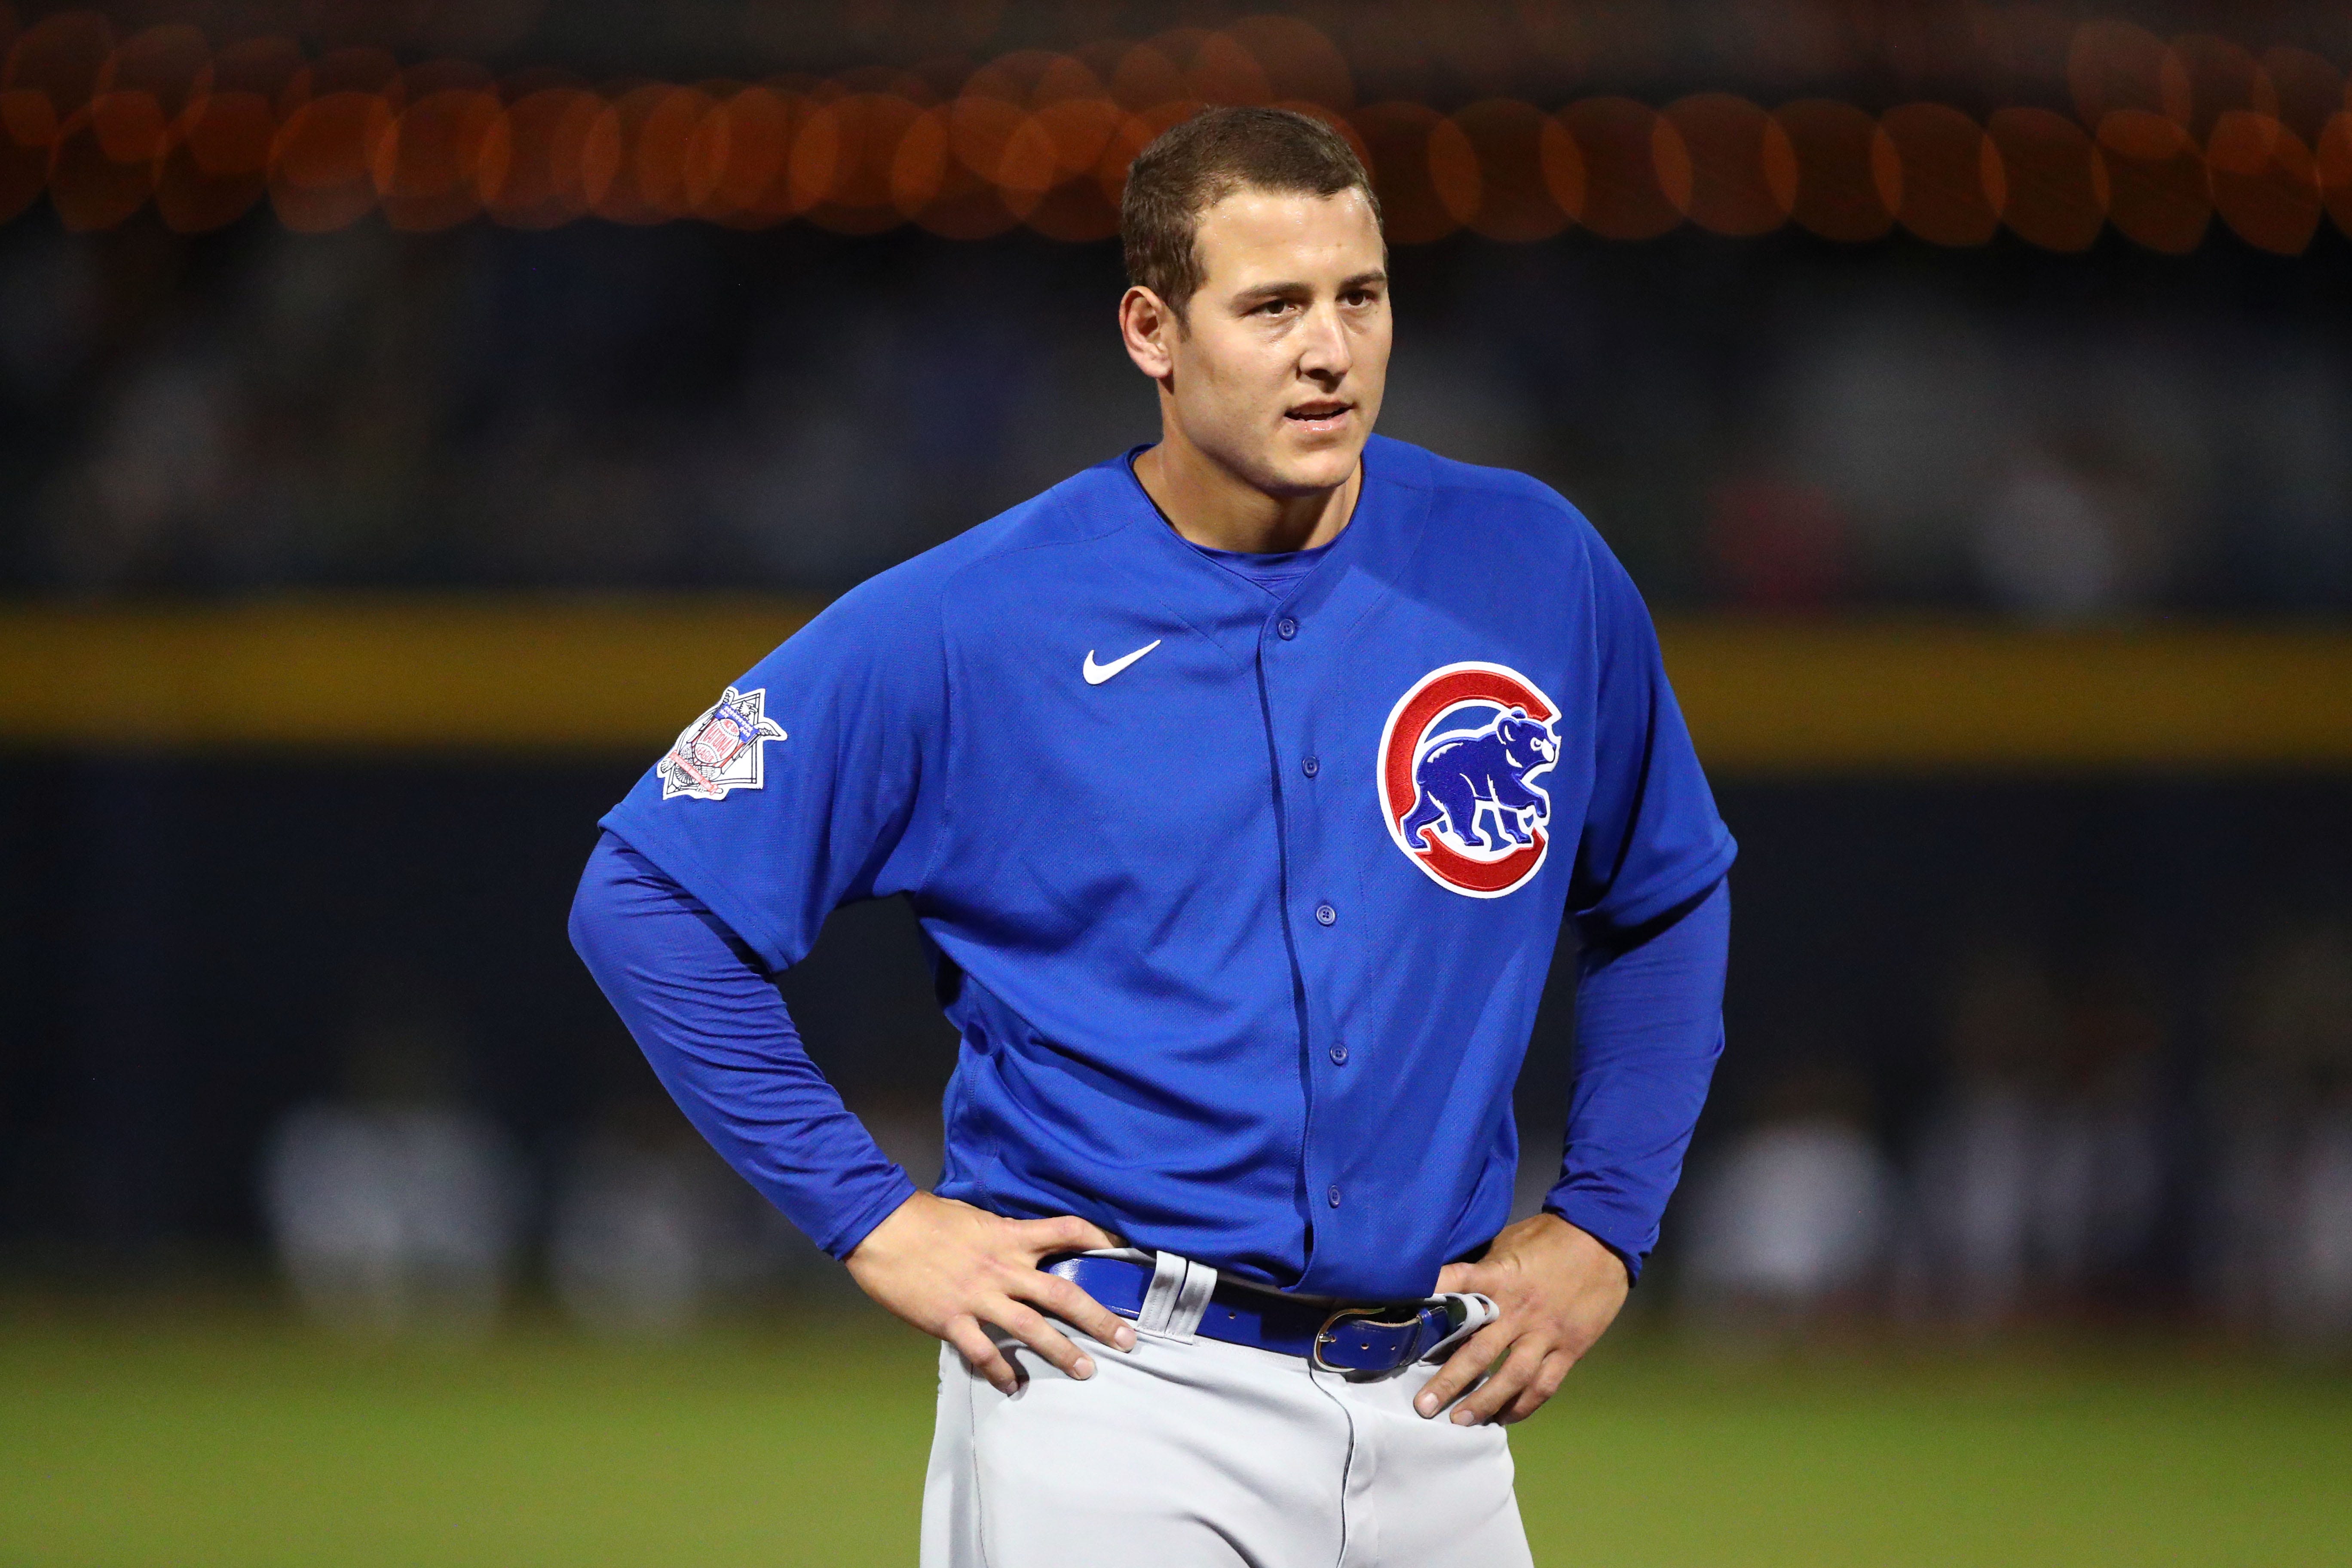 anthony rizzo home jersey